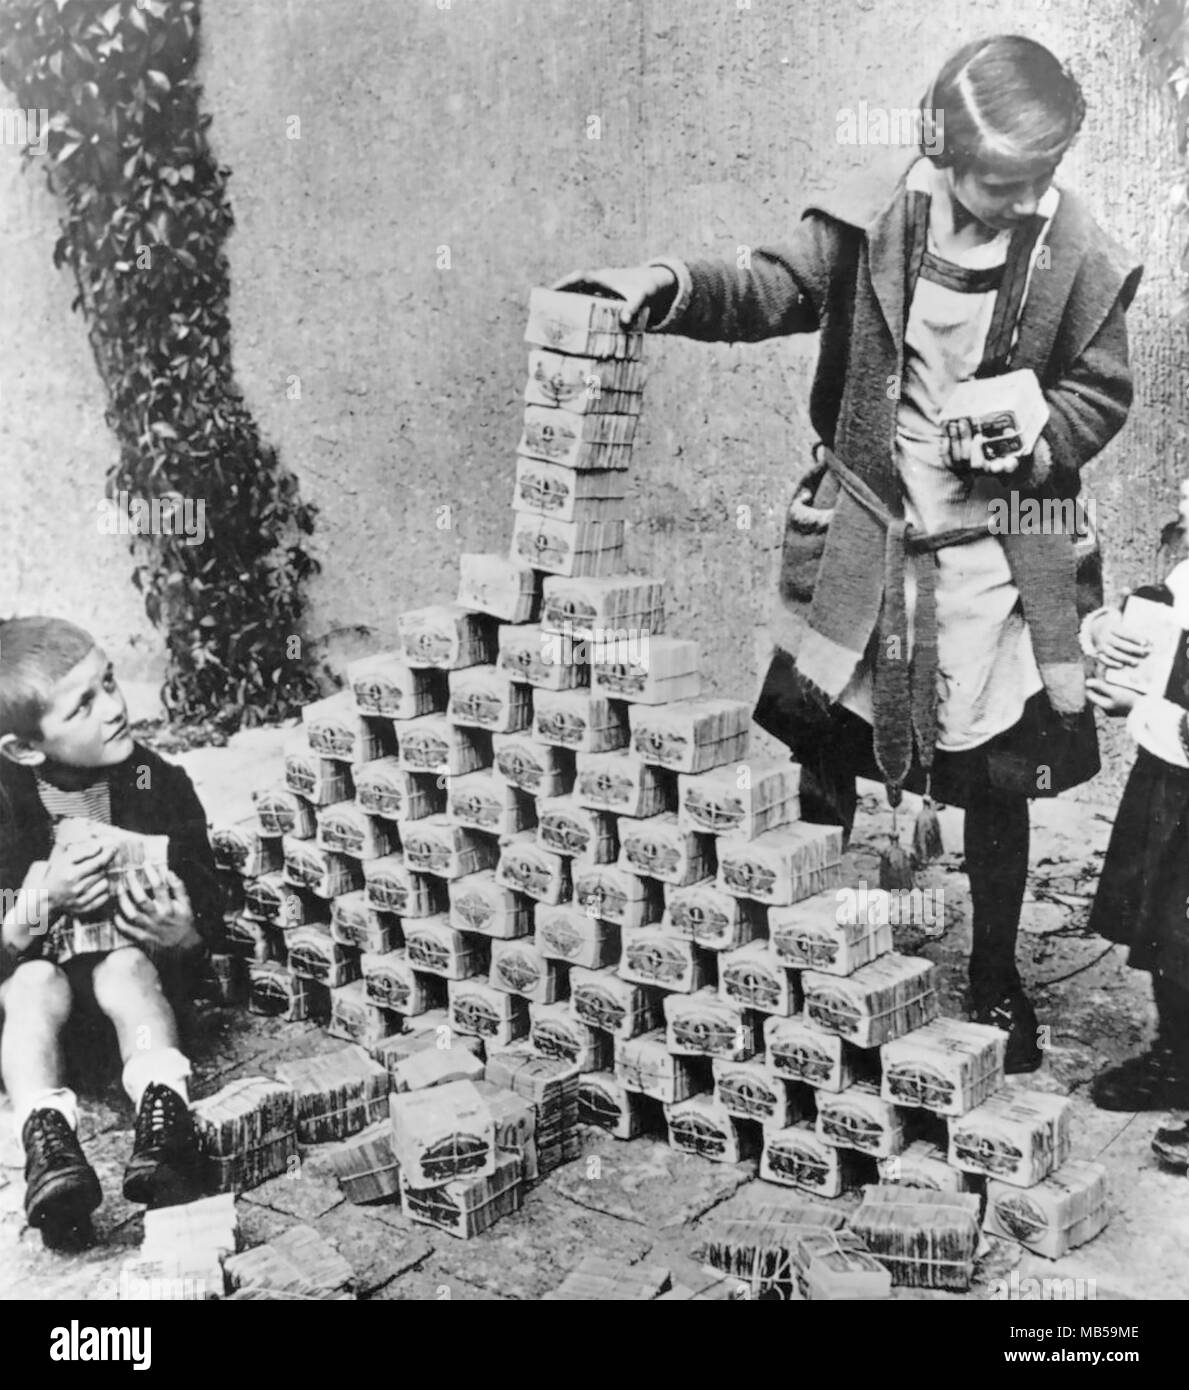 weimar-republic-hyperinflation-1918-1924-bank-notes-as-building-blocks-for-children-MB59ME.jpg